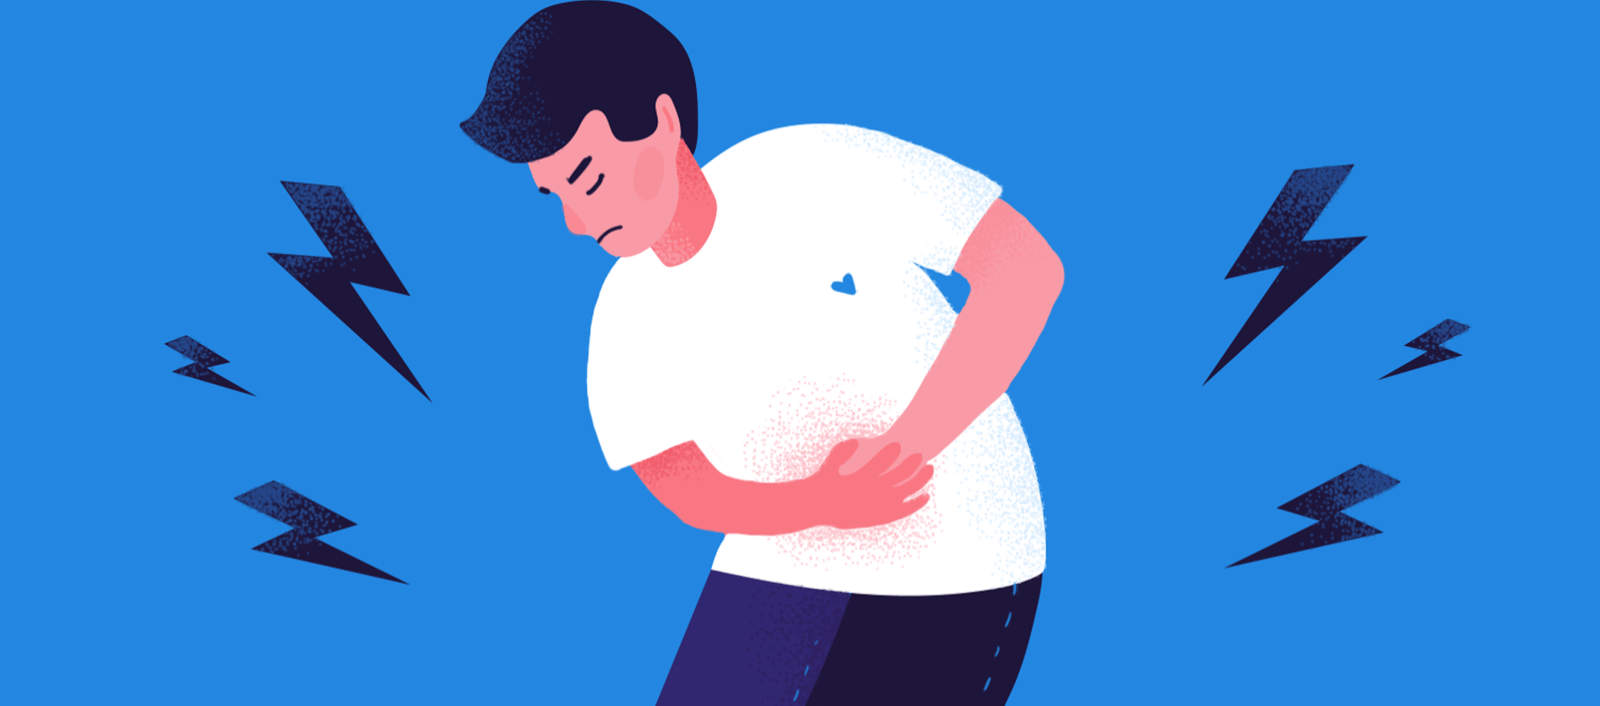 How Anxiety Can Cause Bloating